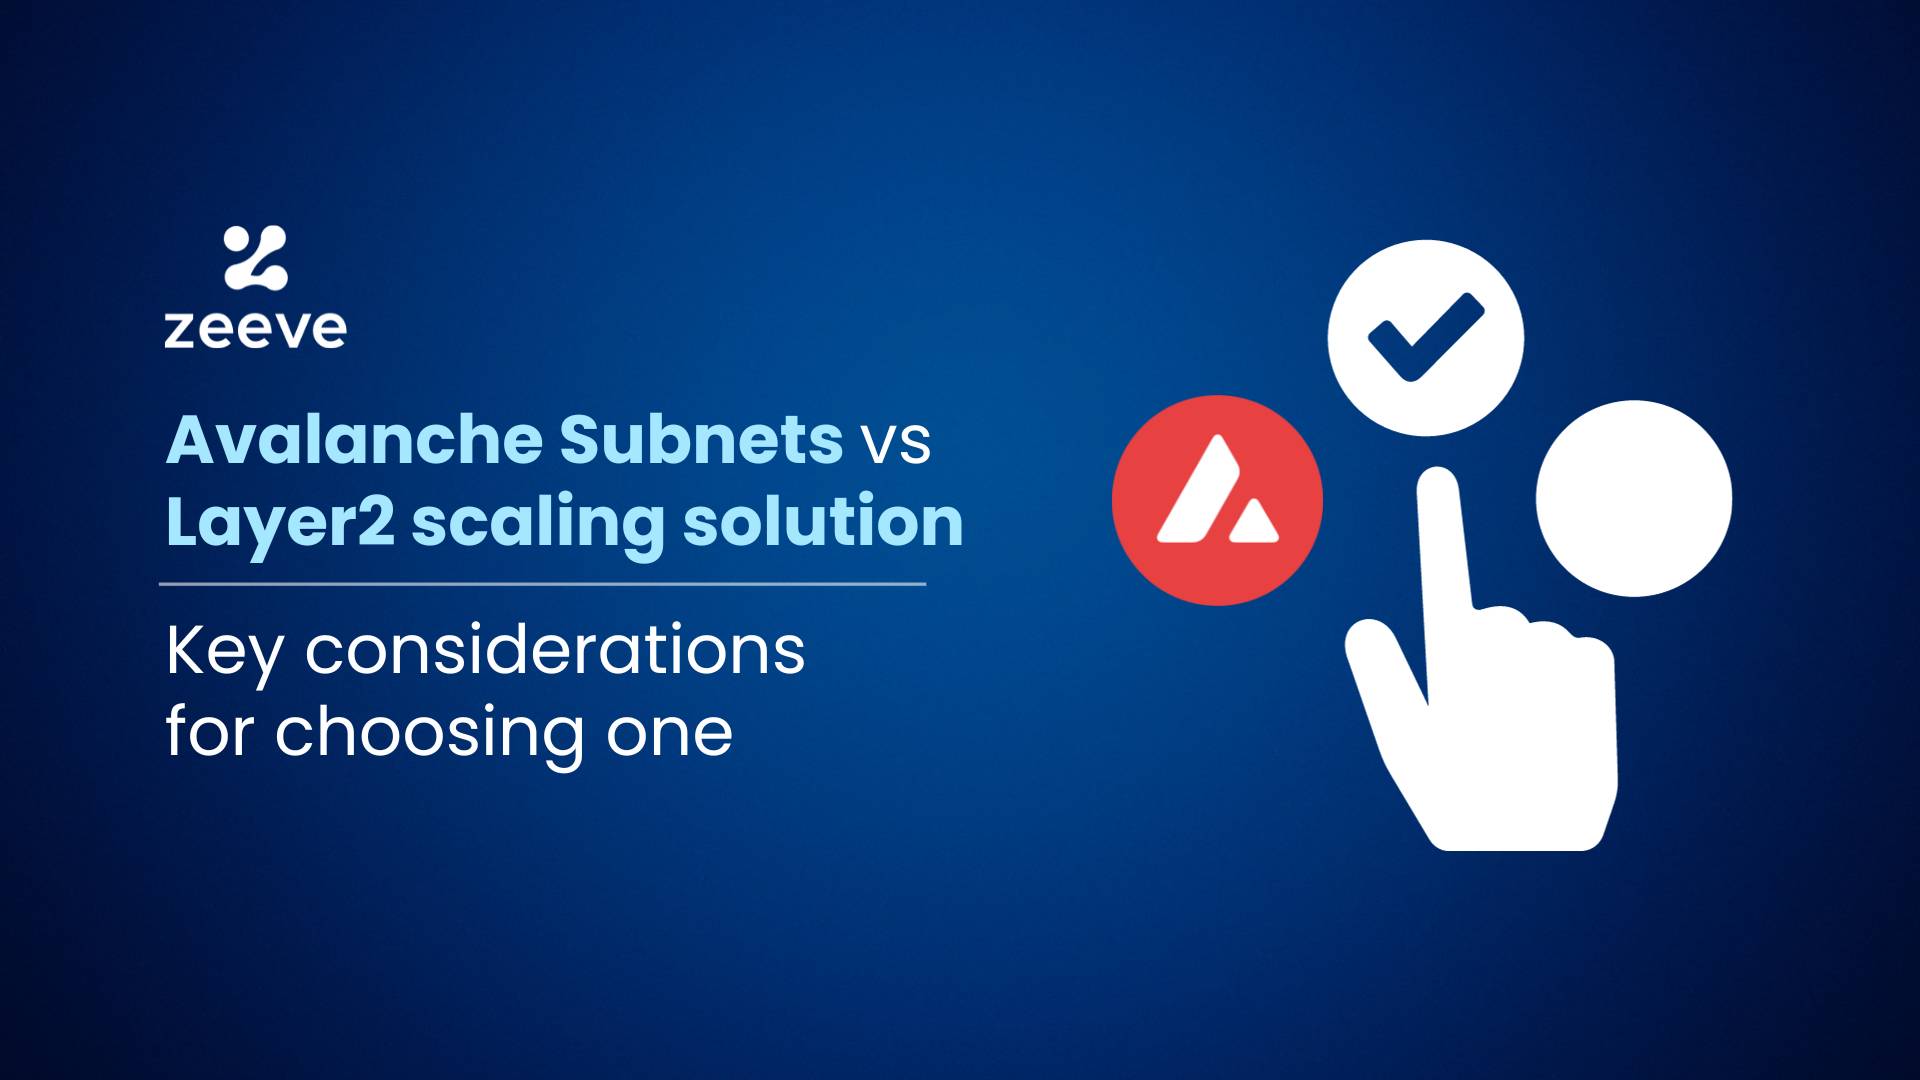 Avalanche subnets vs layer2 scaling solution